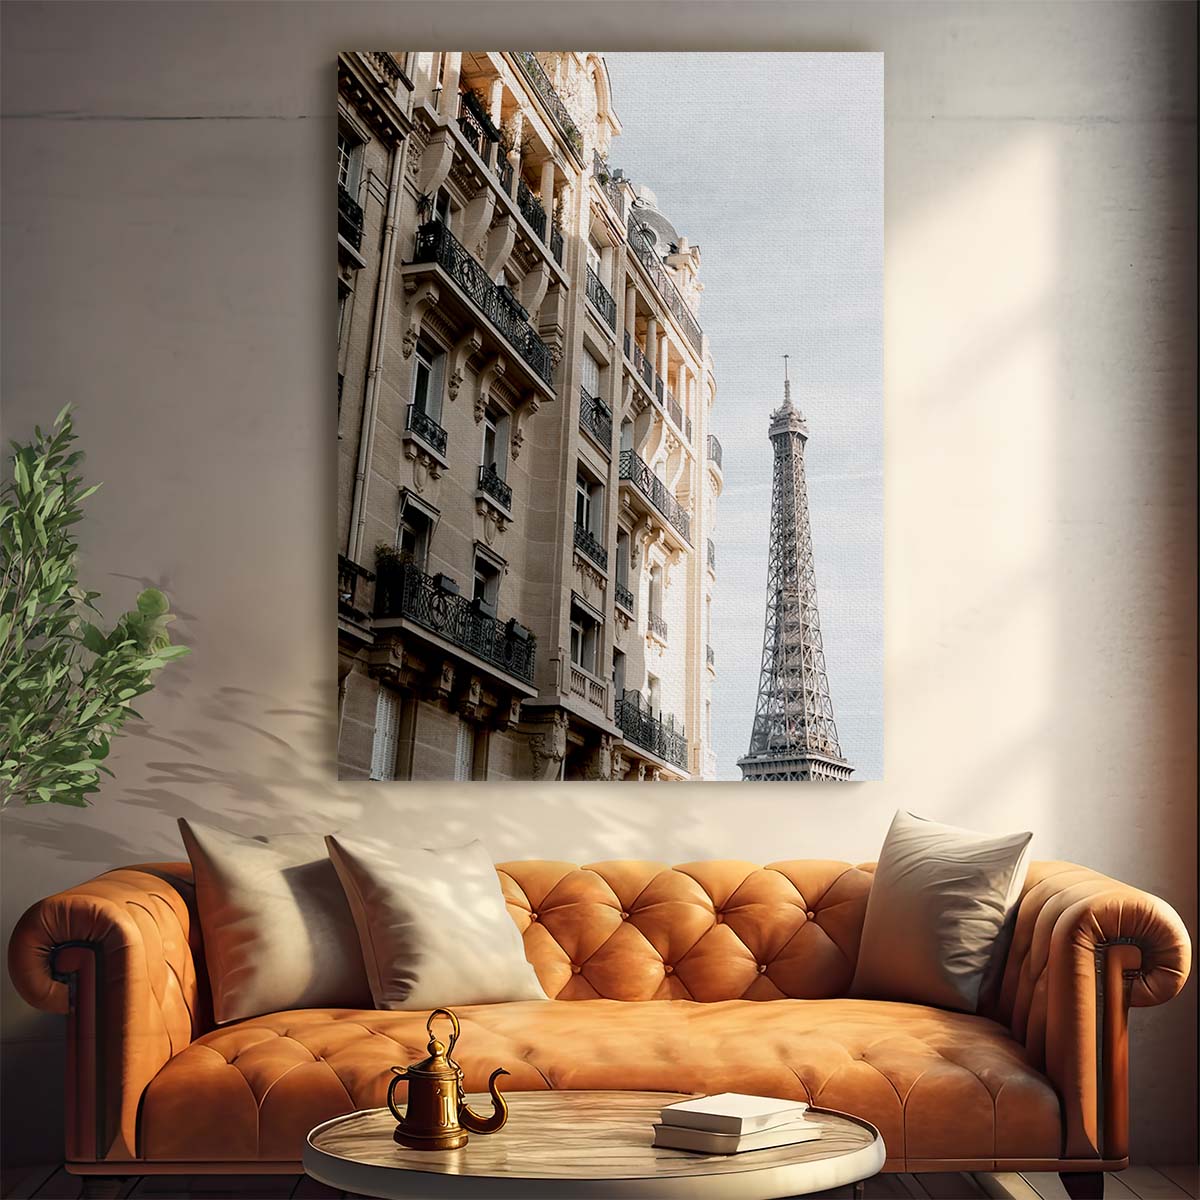 Paris Eiffel Tower Iconic Architecture Photography, Urban Cityscape Wall Art by Luxuriance Designs, made in USA